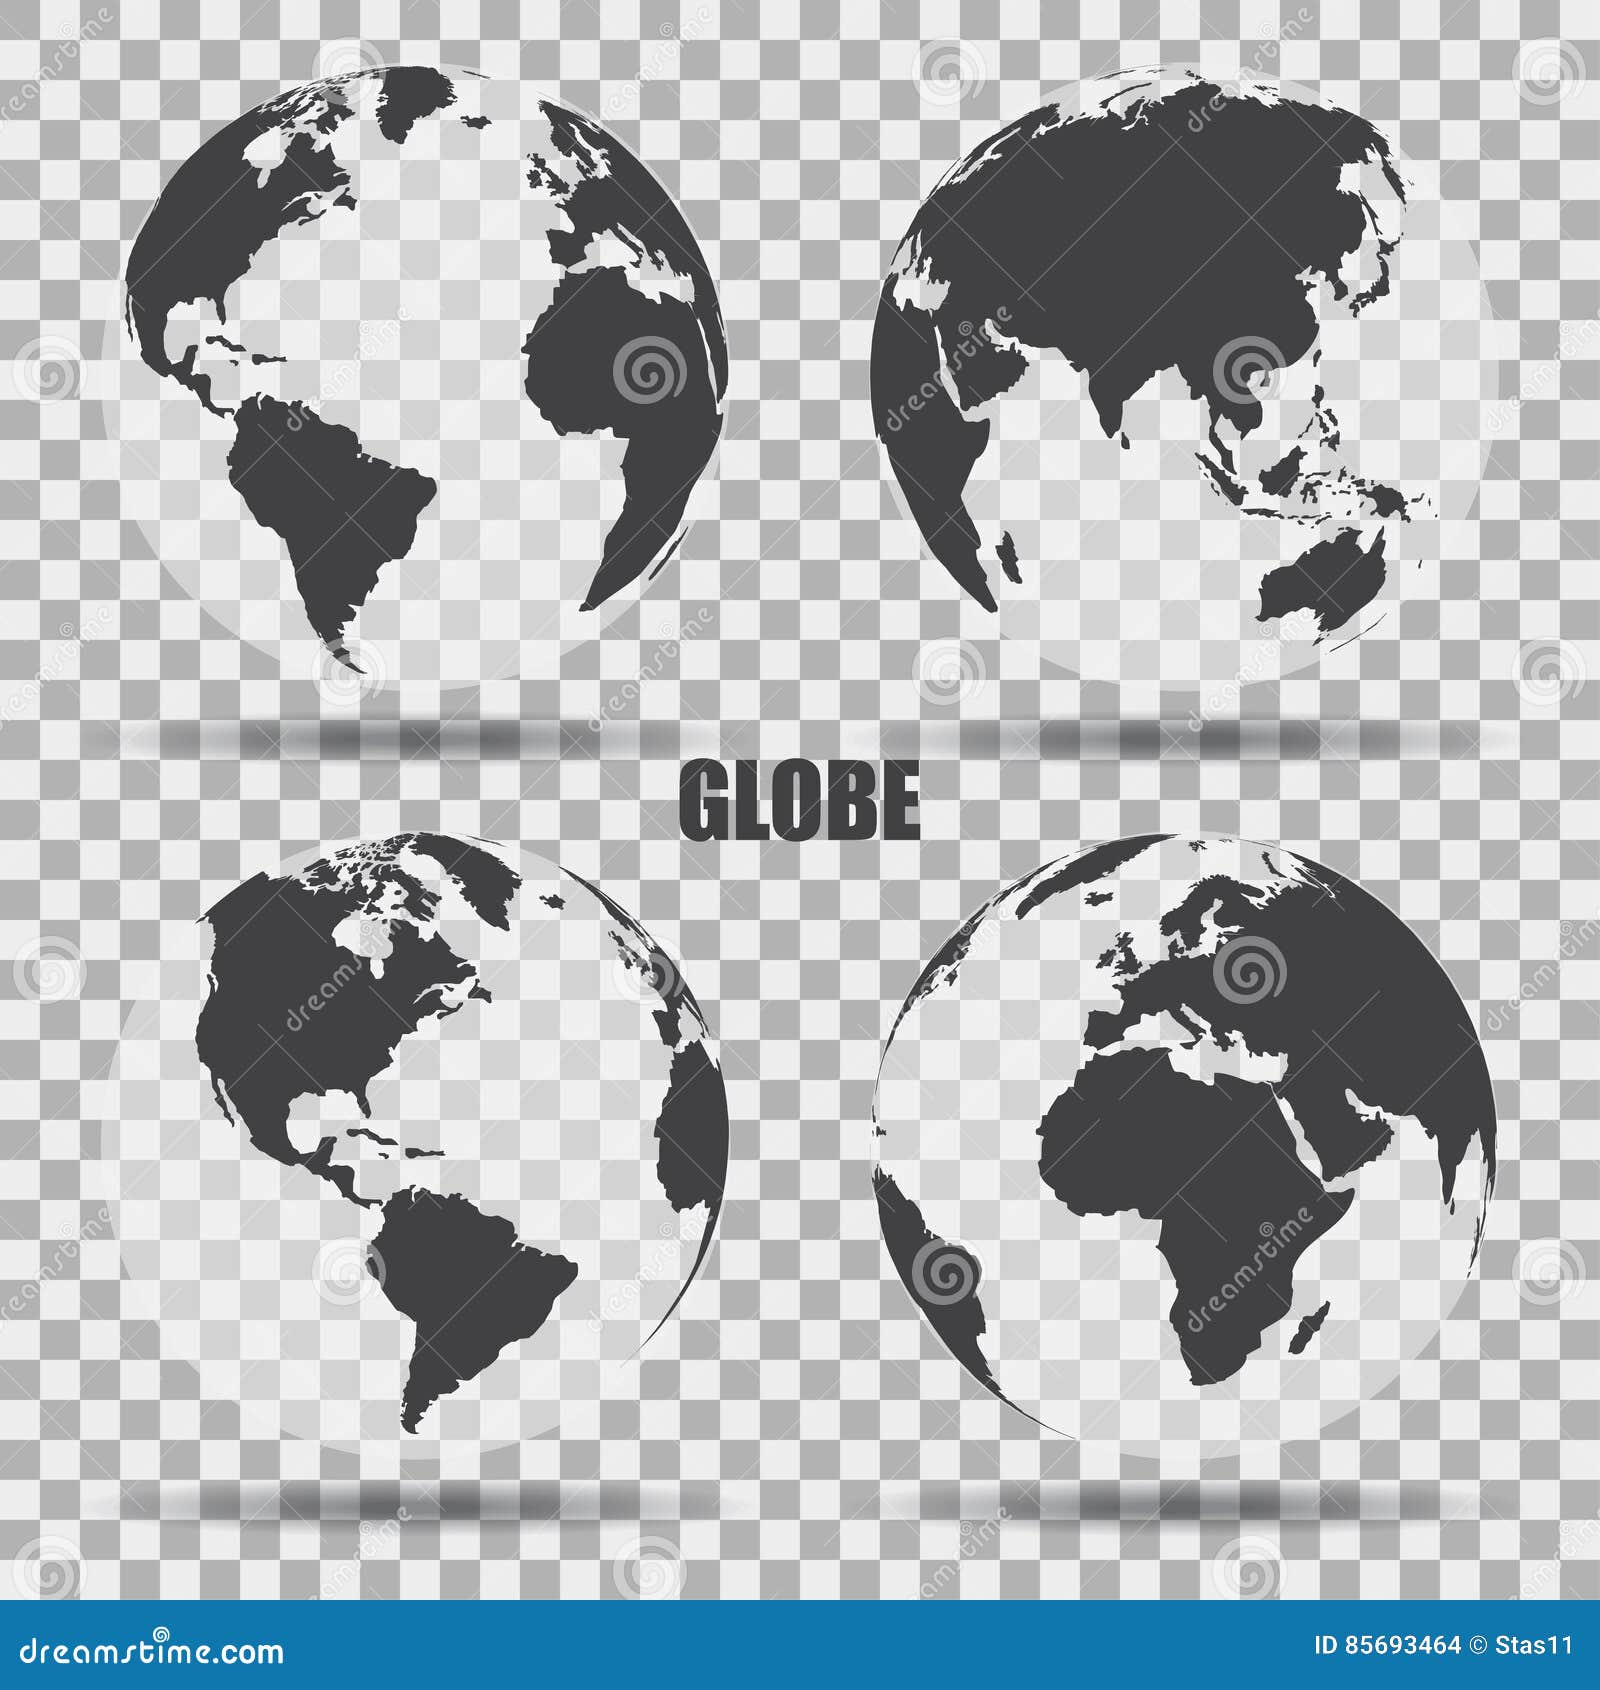 Vector Illustration of Gray Globe Icons with Different Continents ...